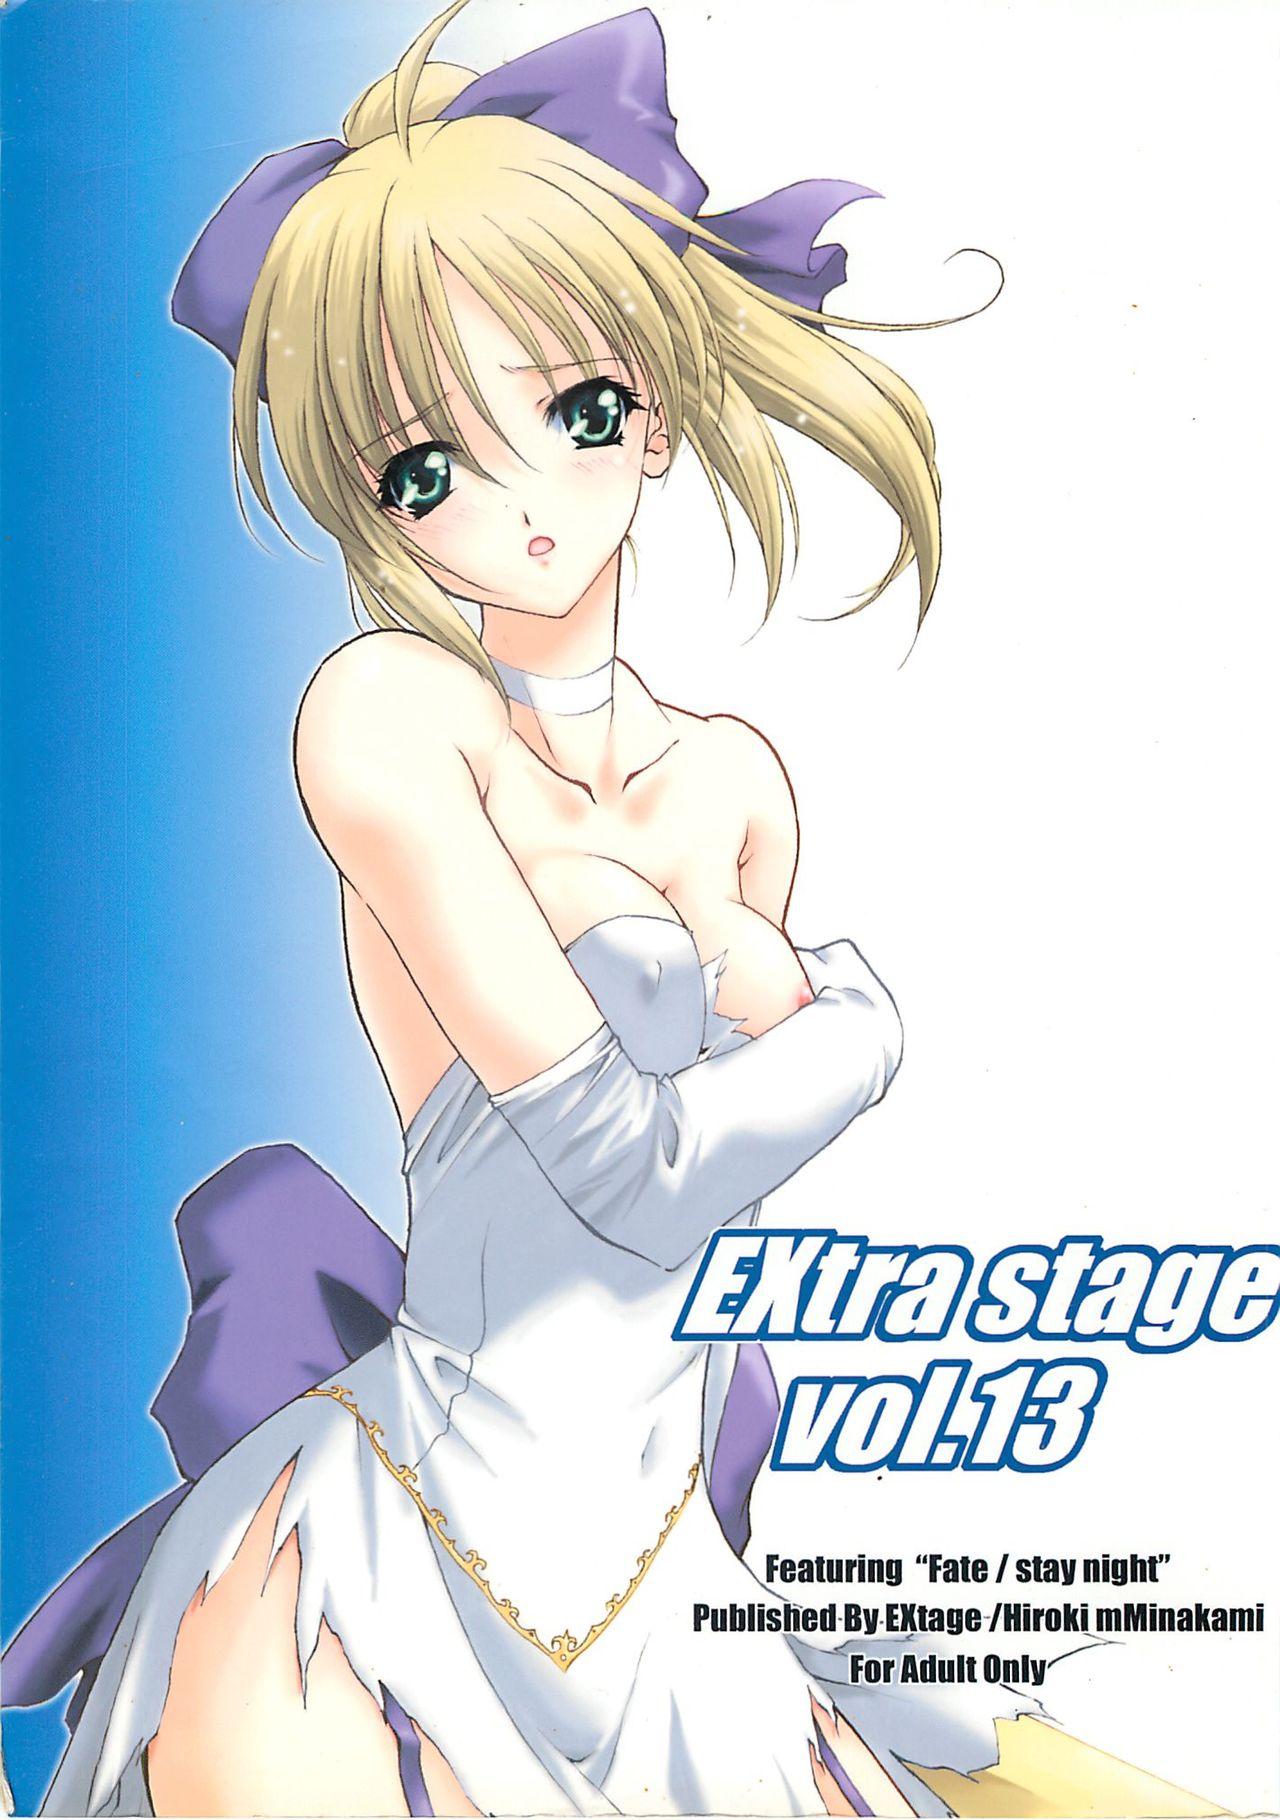 Lez EXtra stage vol. 13 - Fate stay night Taboo - Page 1